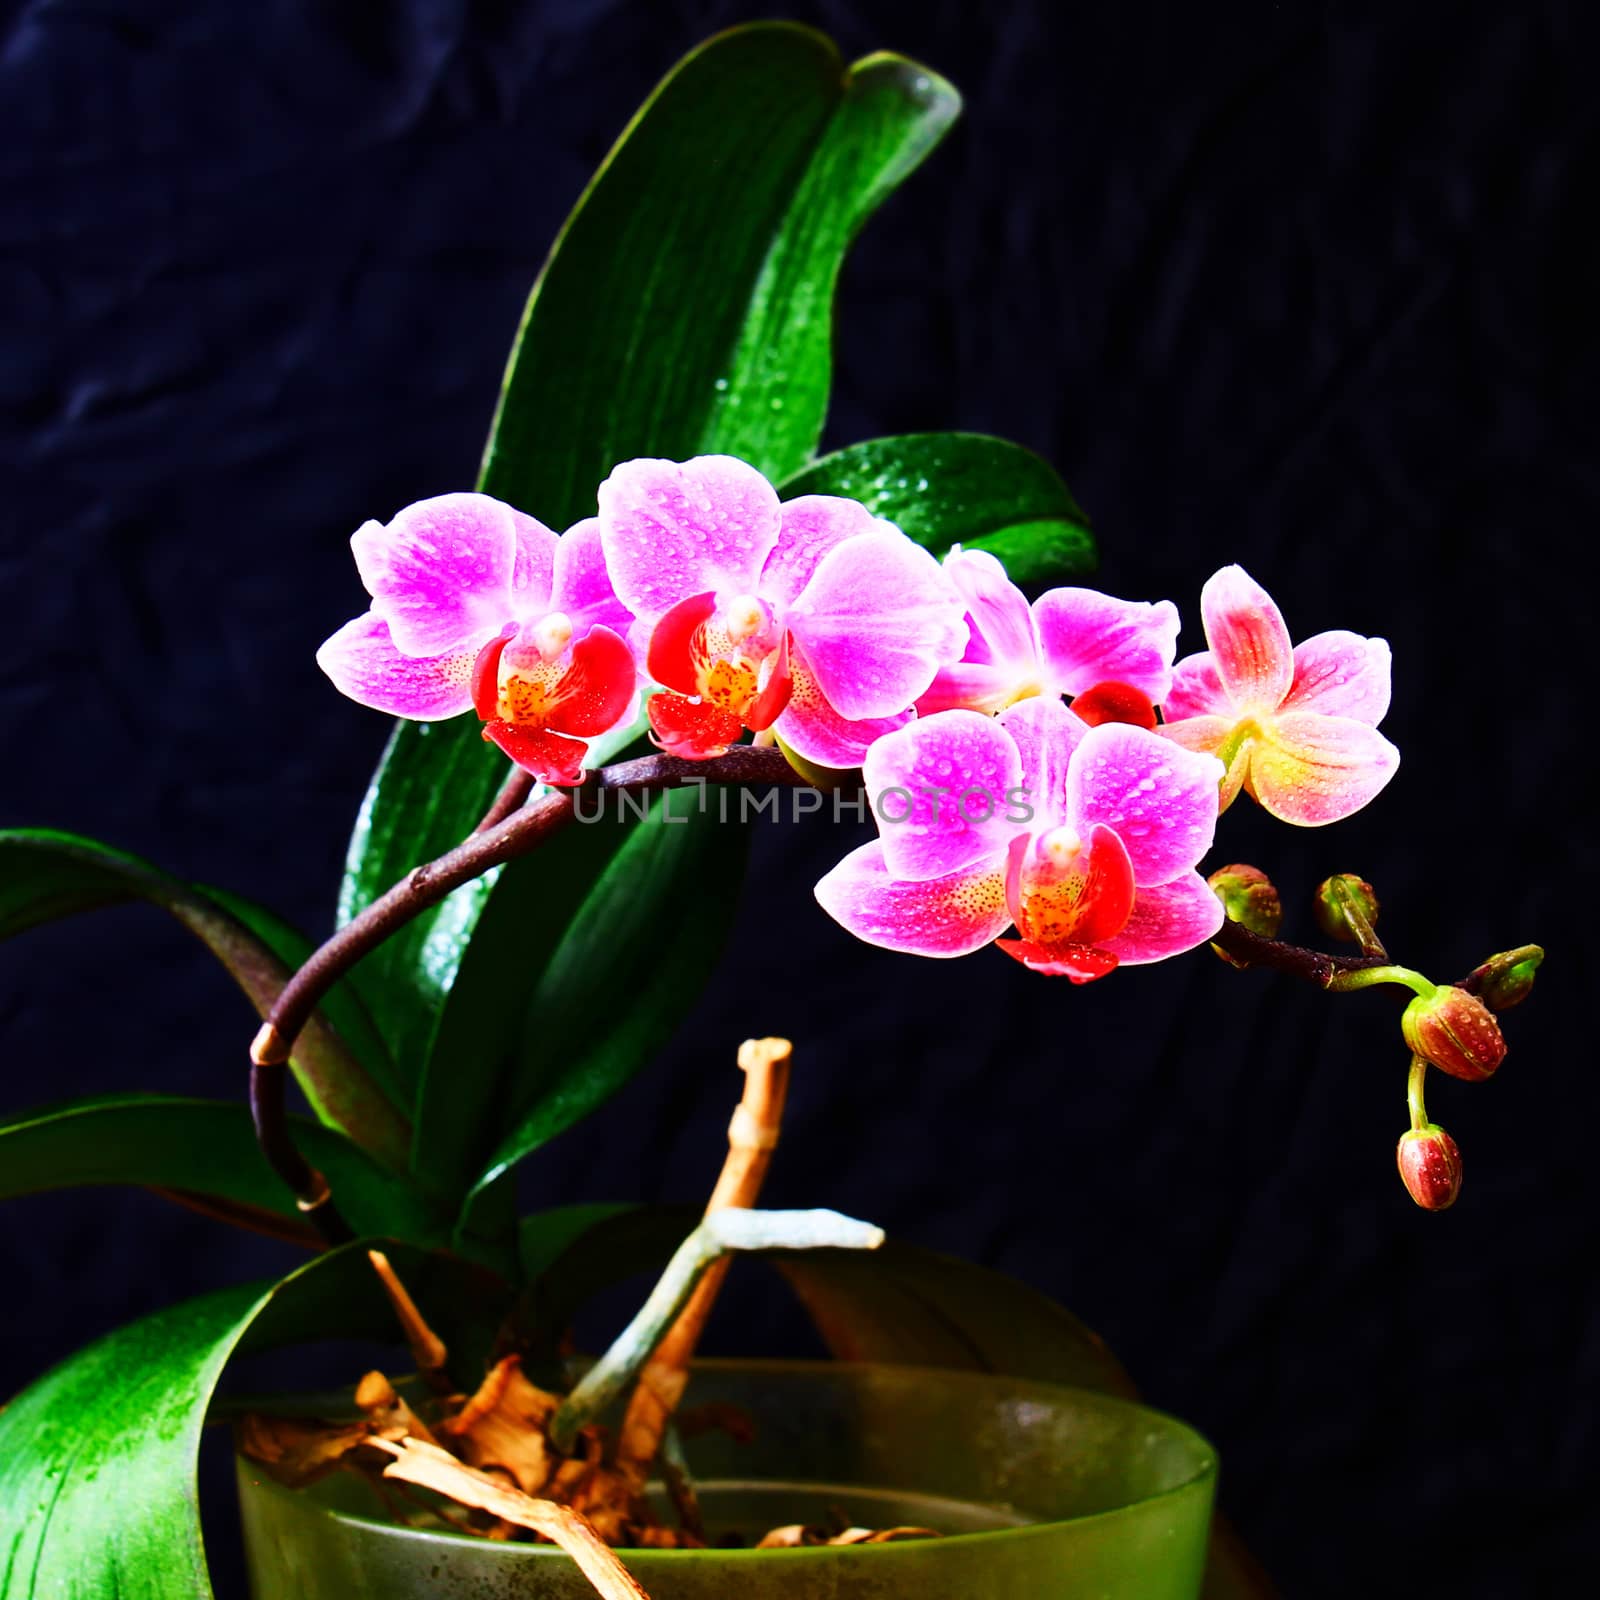 Phalaenopsis in blossom, close up